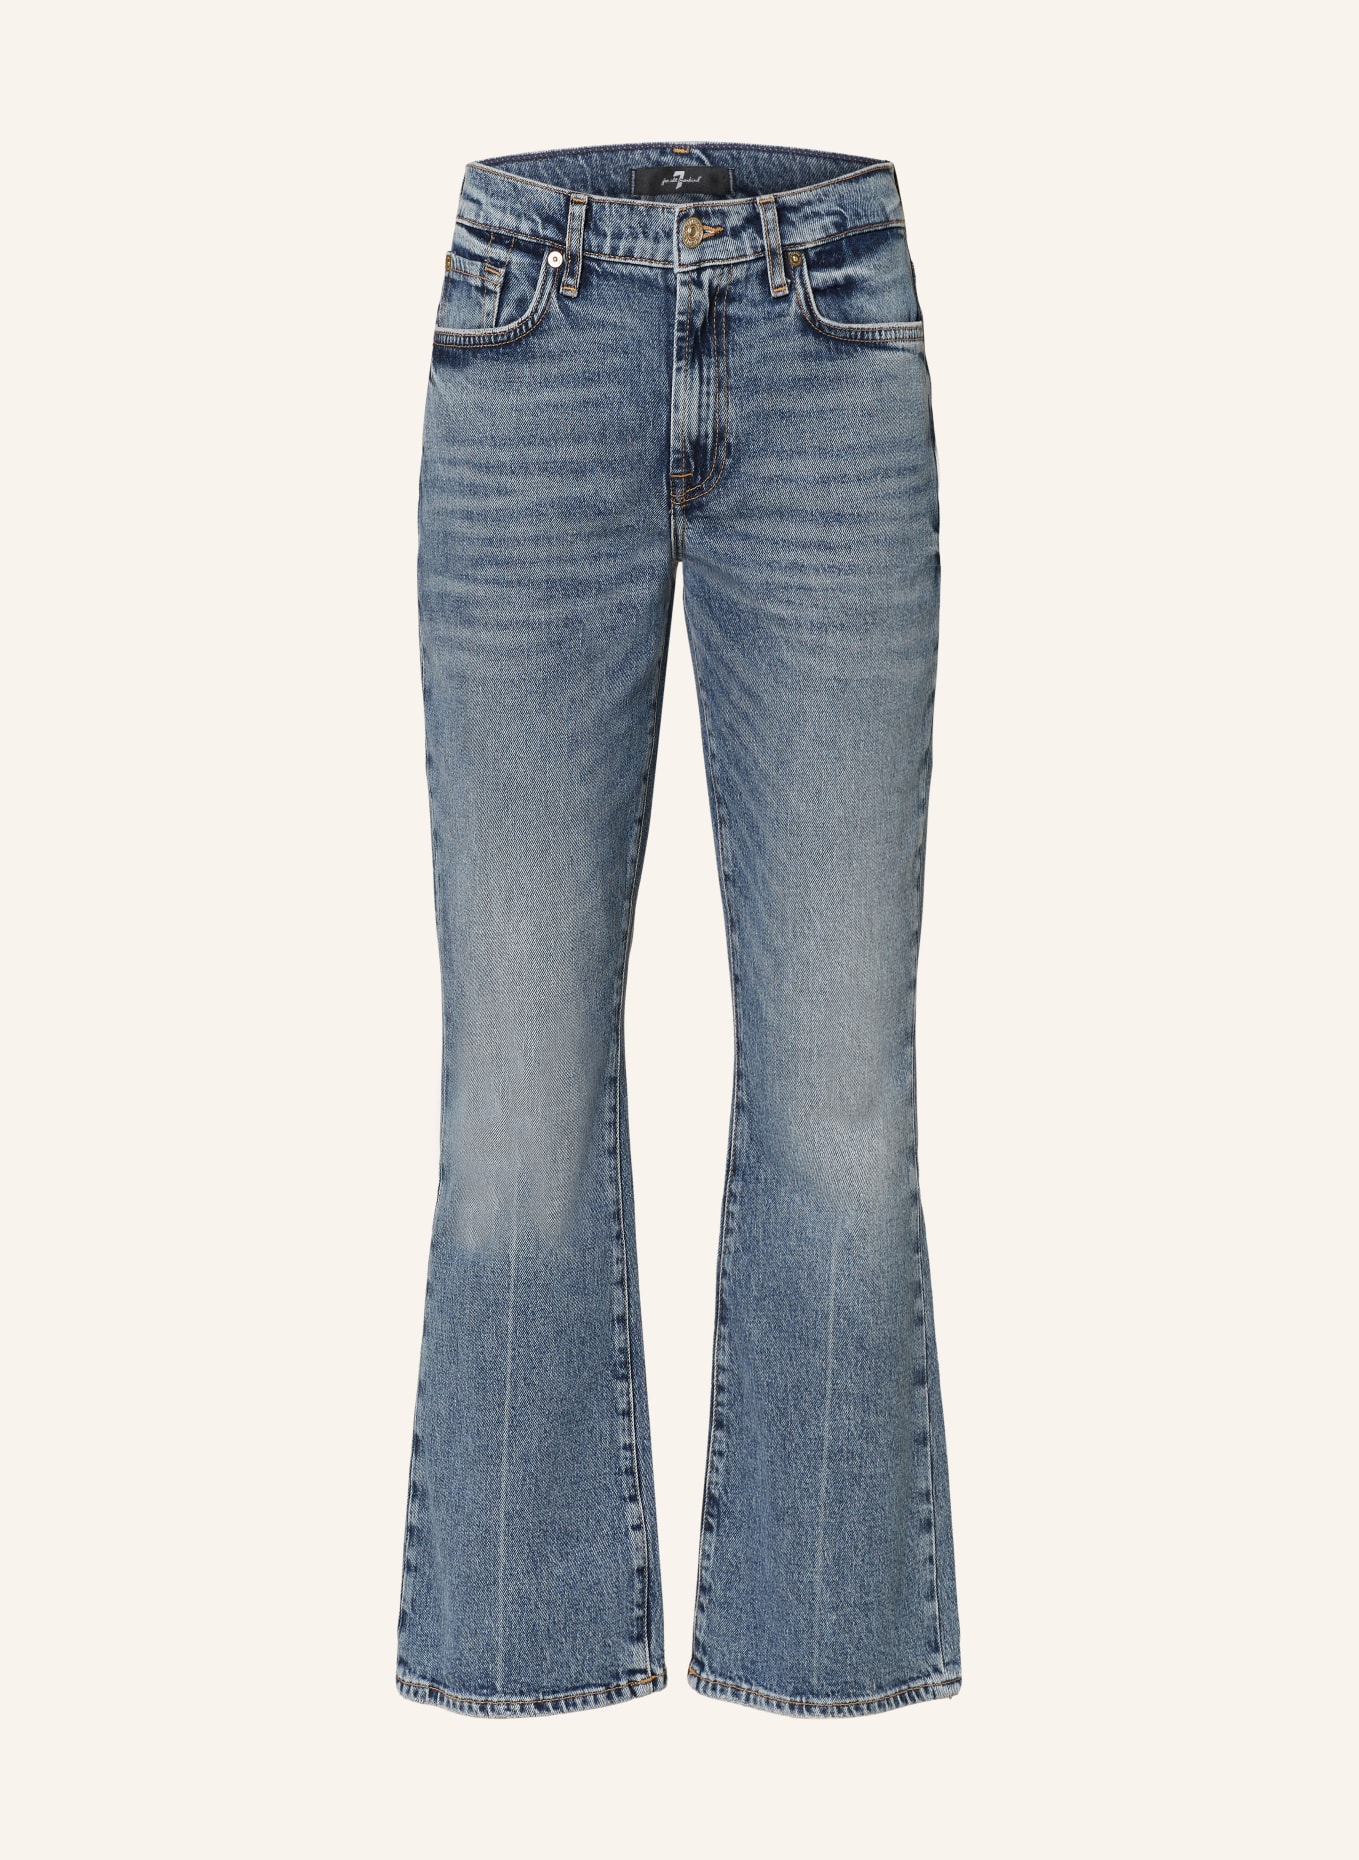 7 for all mankind Bootcut Jeans BETTY, Farbe: LIGHT BLUE (Bild 1)